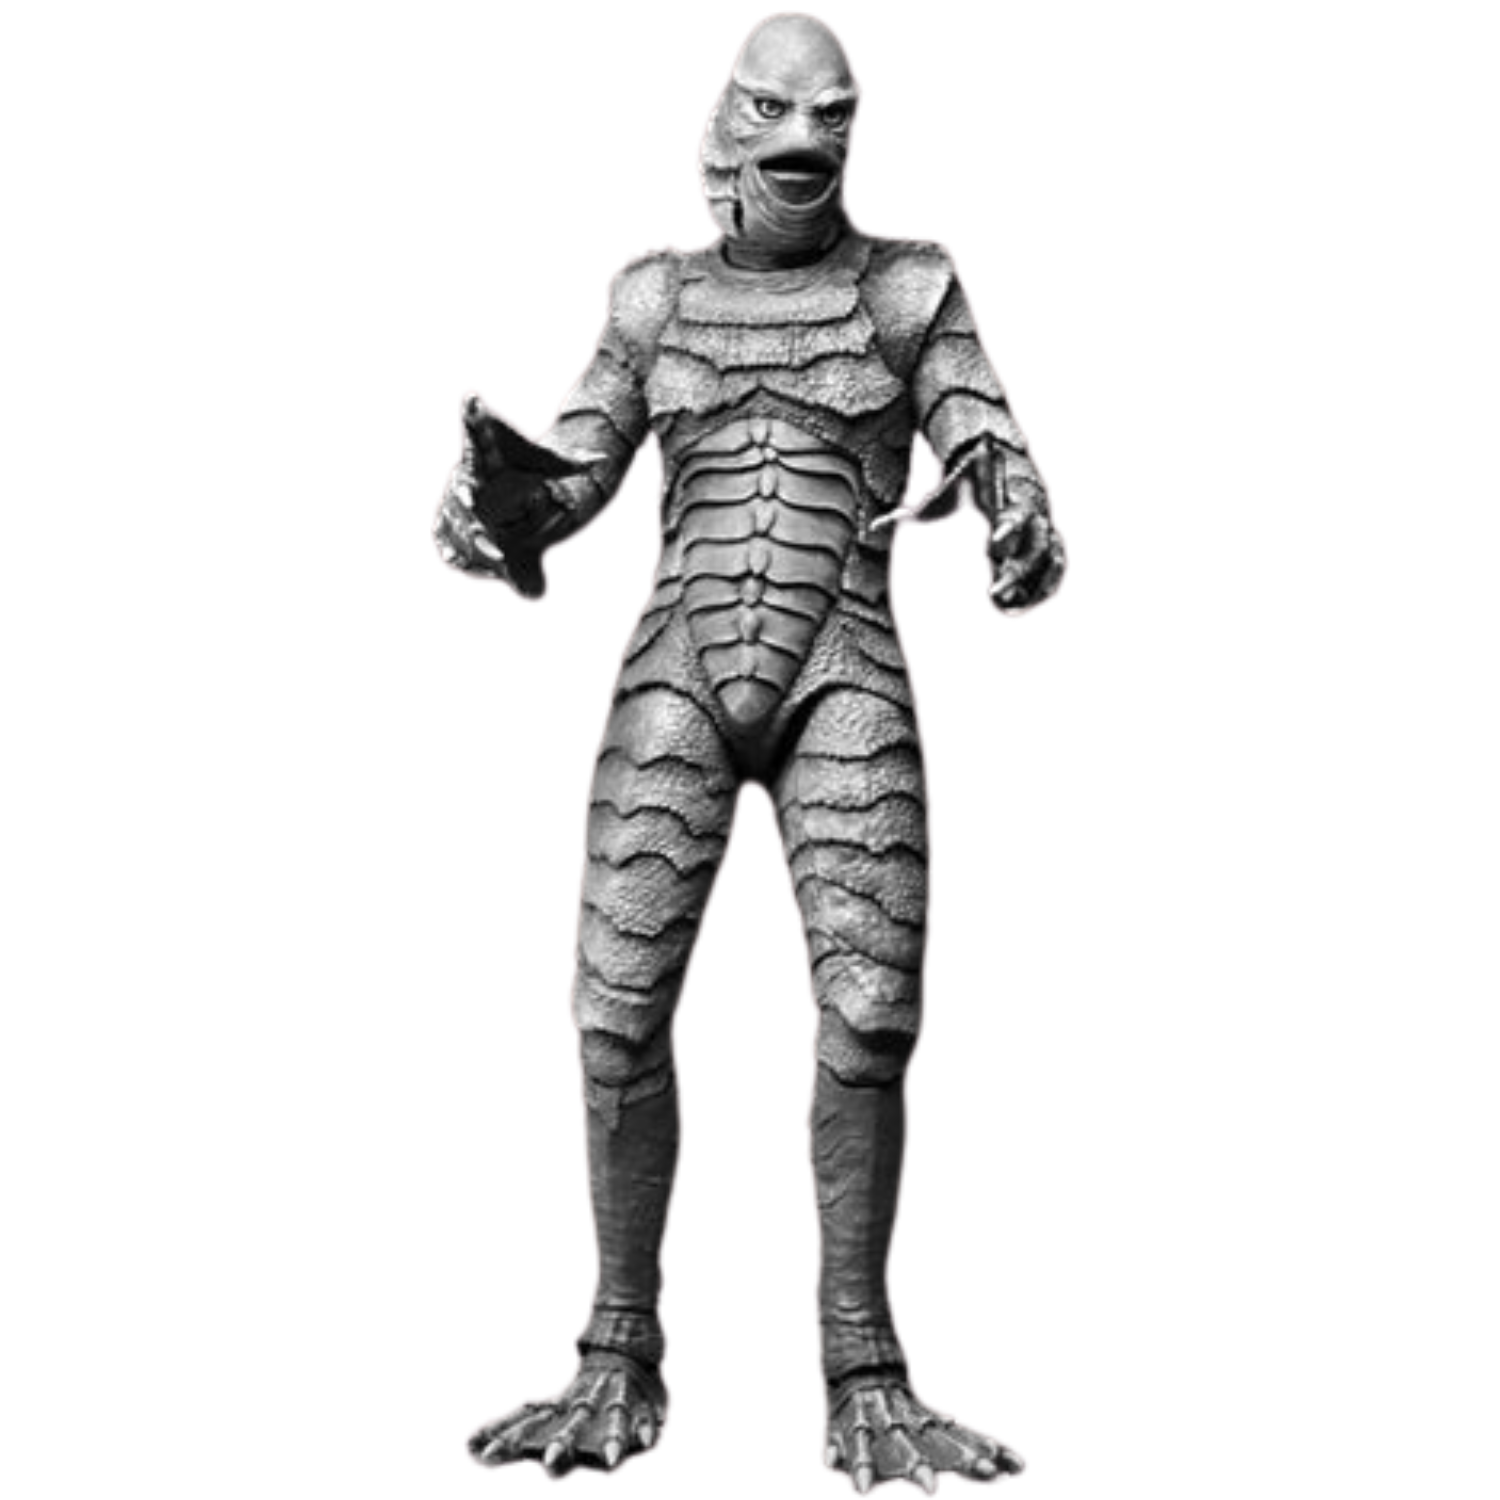 This image shows the figurine for the black and white version of the Creature from the Black Lagoon